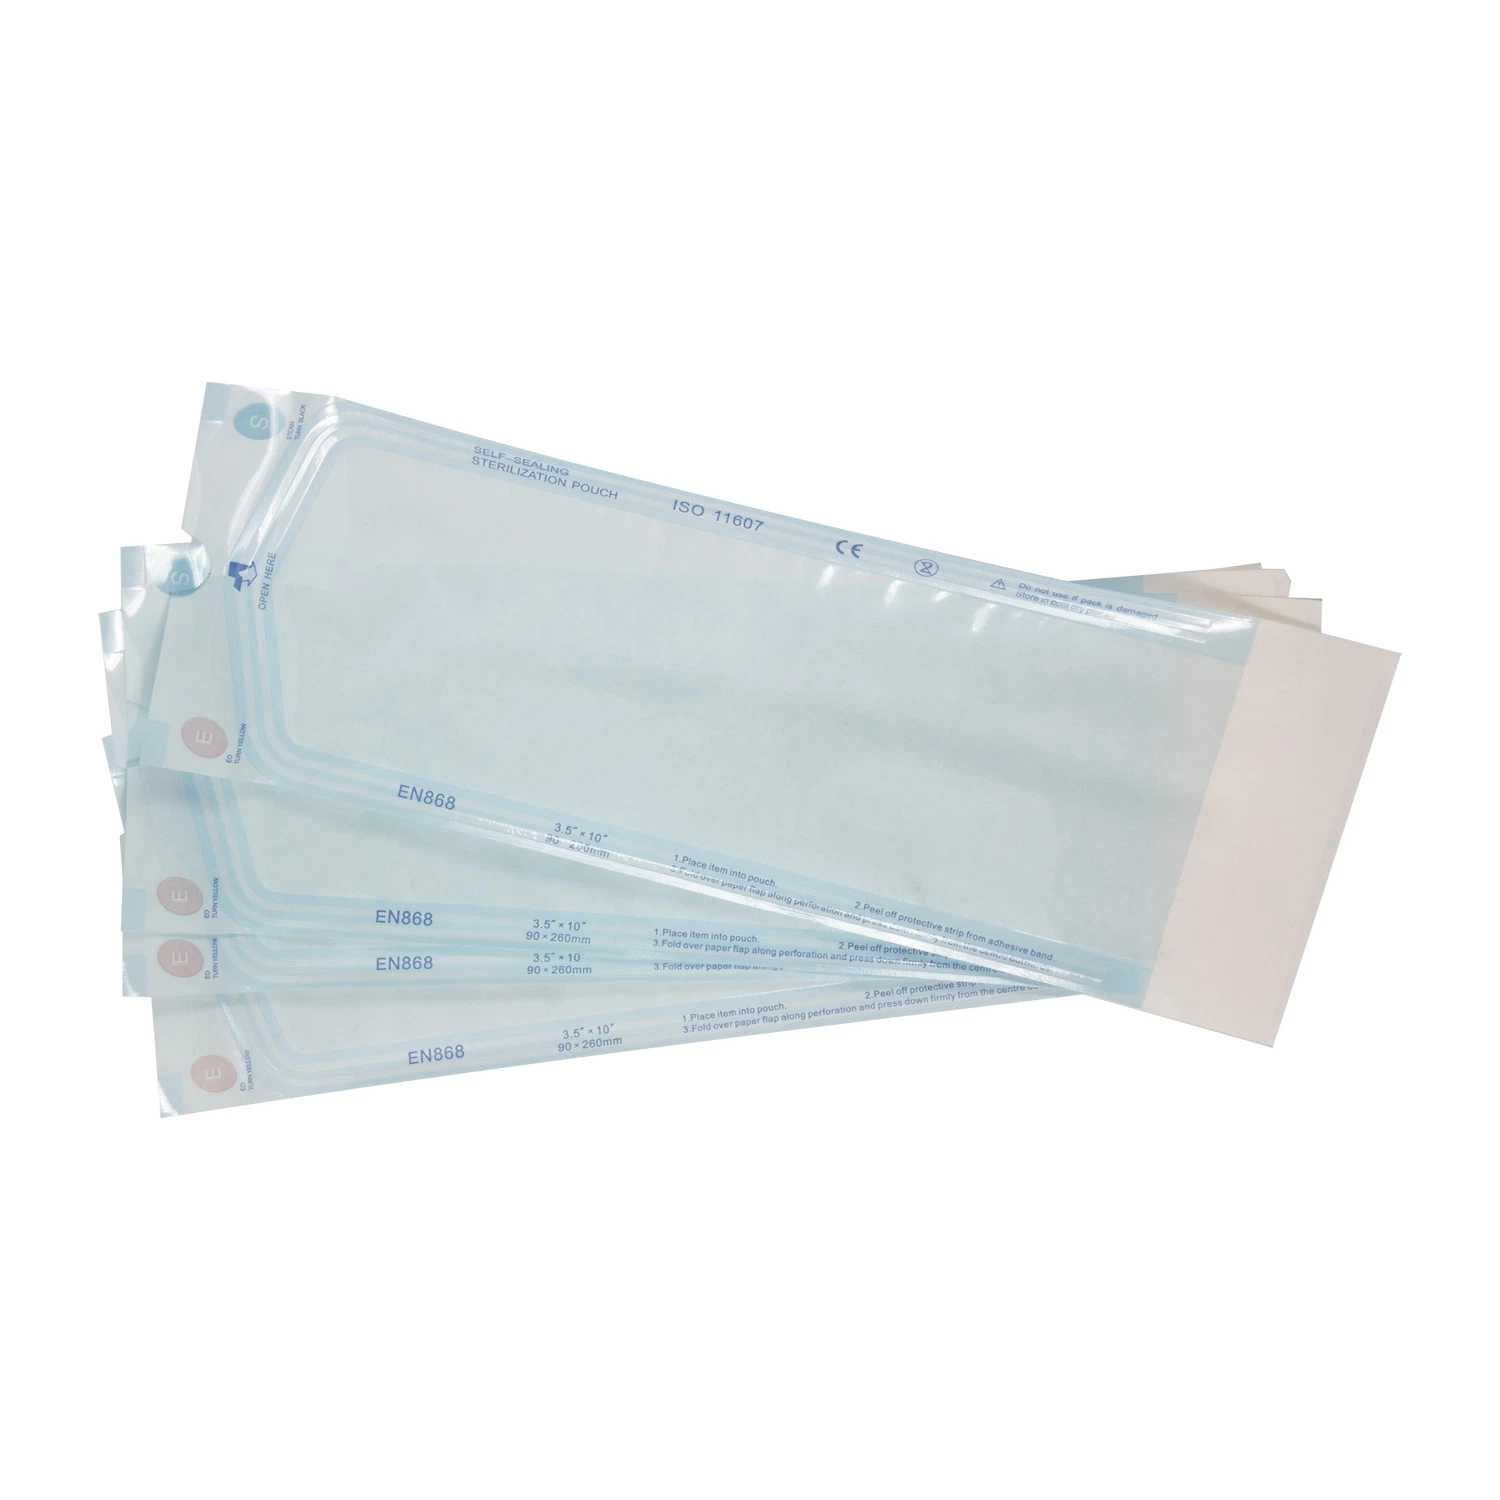 Self Sealing Sterilization Pouch for Medical or Dental Device